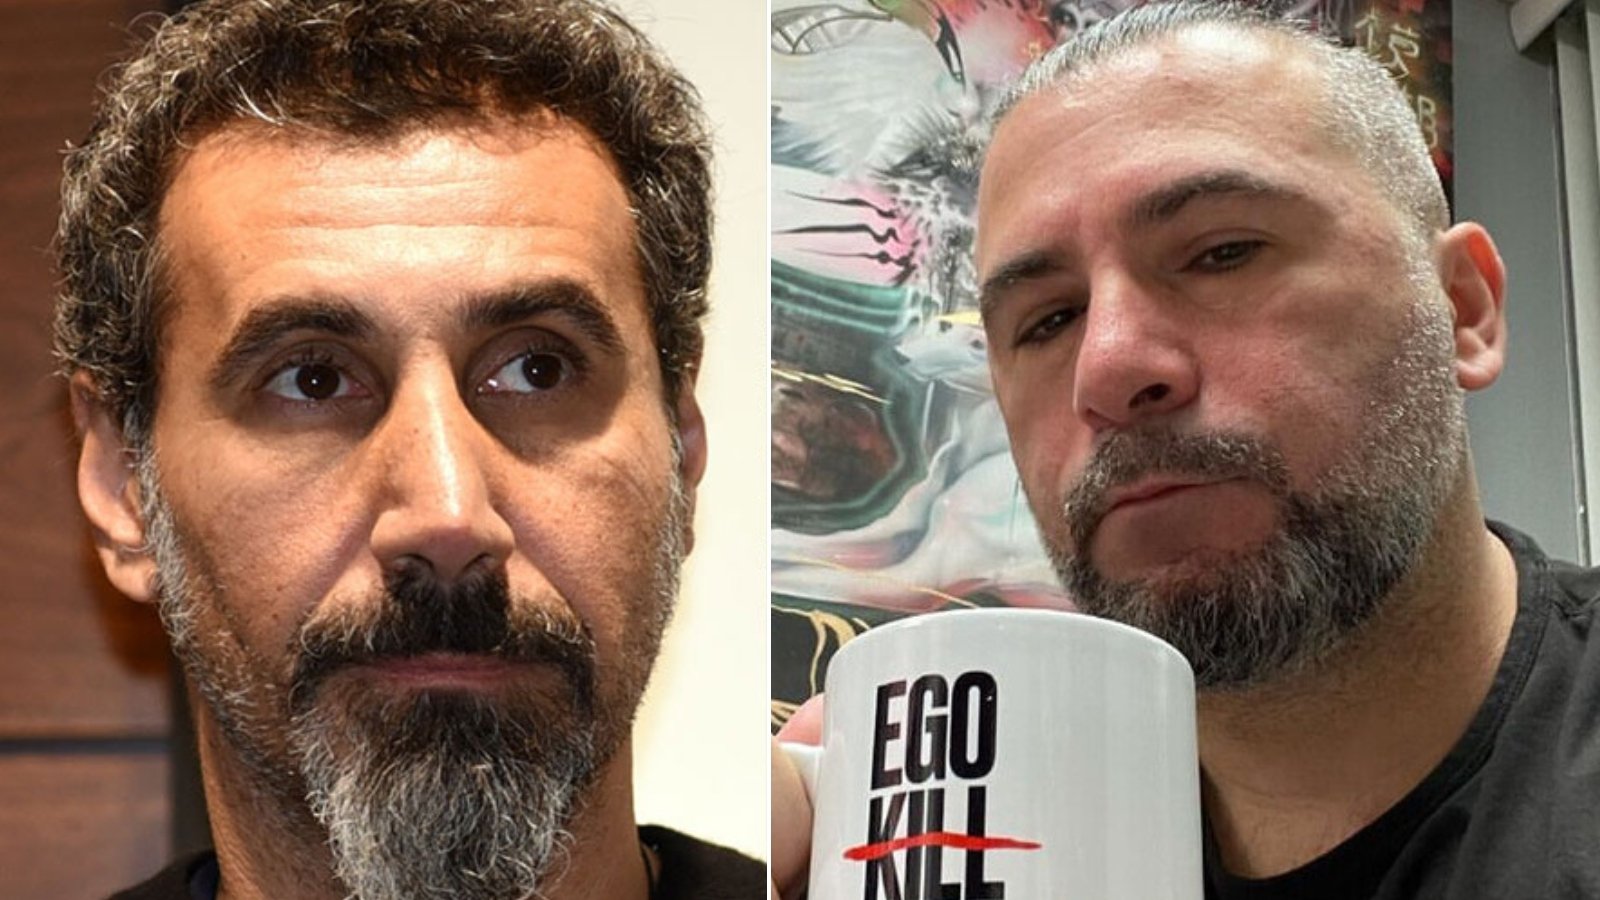 'The Option Has Always Been There for the Band to Move on Without Me, and He Knows It': Serj Tankian Responds to John Dolmayan's SOAD Accusations